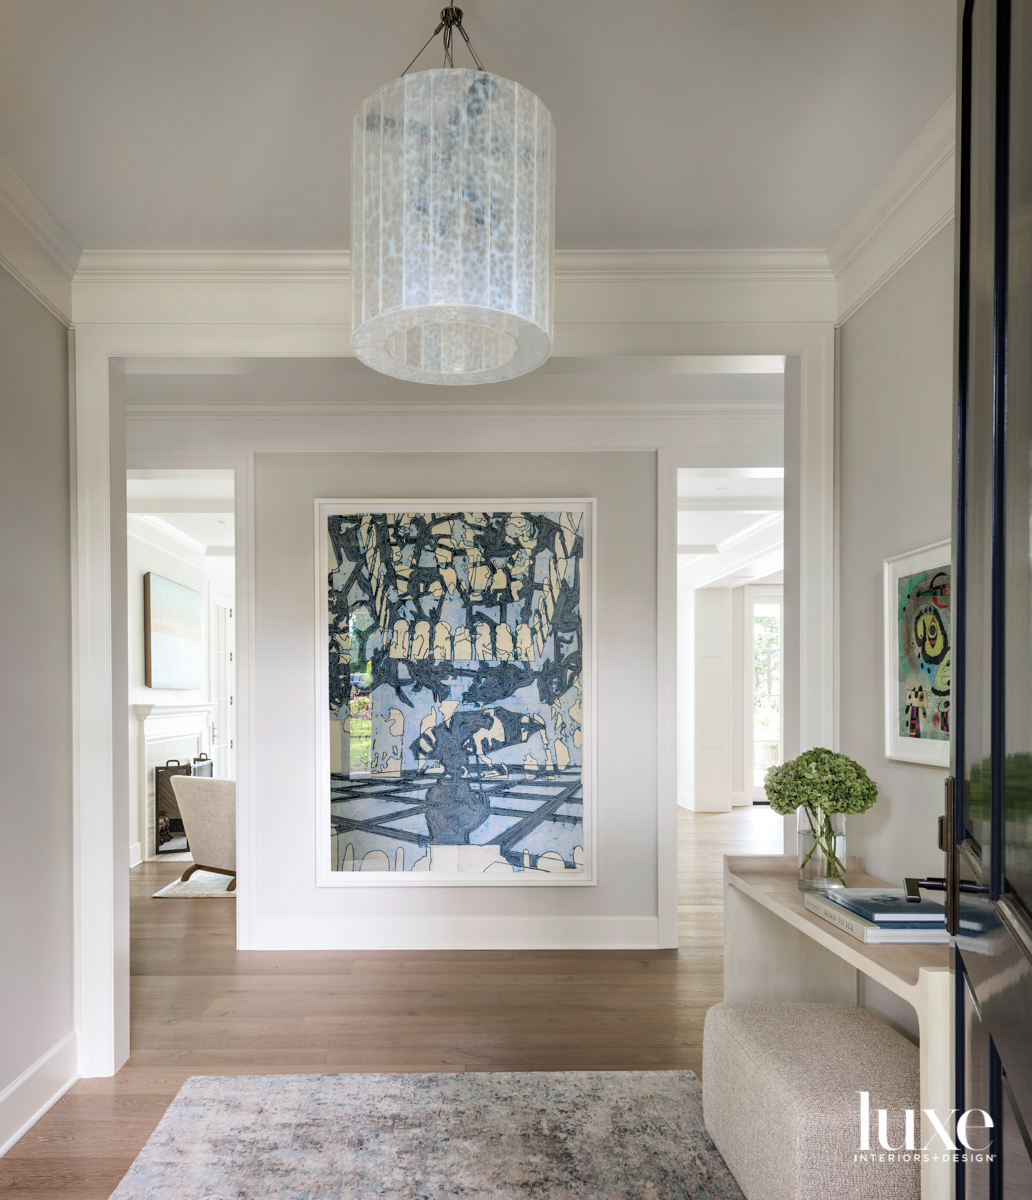 Summer Beckons At A Northwest Lake Home Primed For Making Memories - Luxe  Interiors + Design